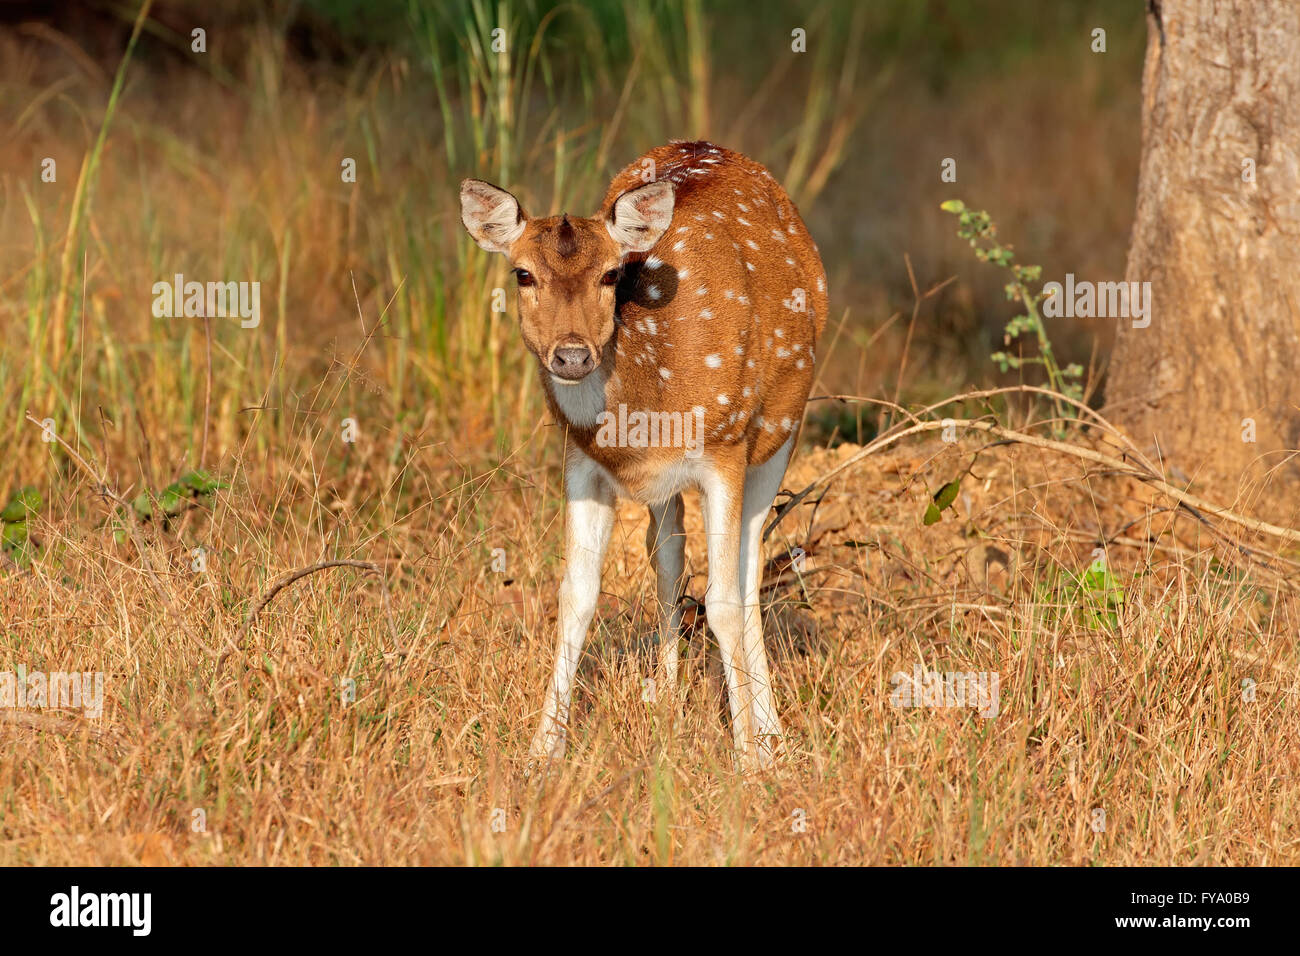 Female spotted deer or chital (Axis axis), Kanha National Park, India Stock Photo